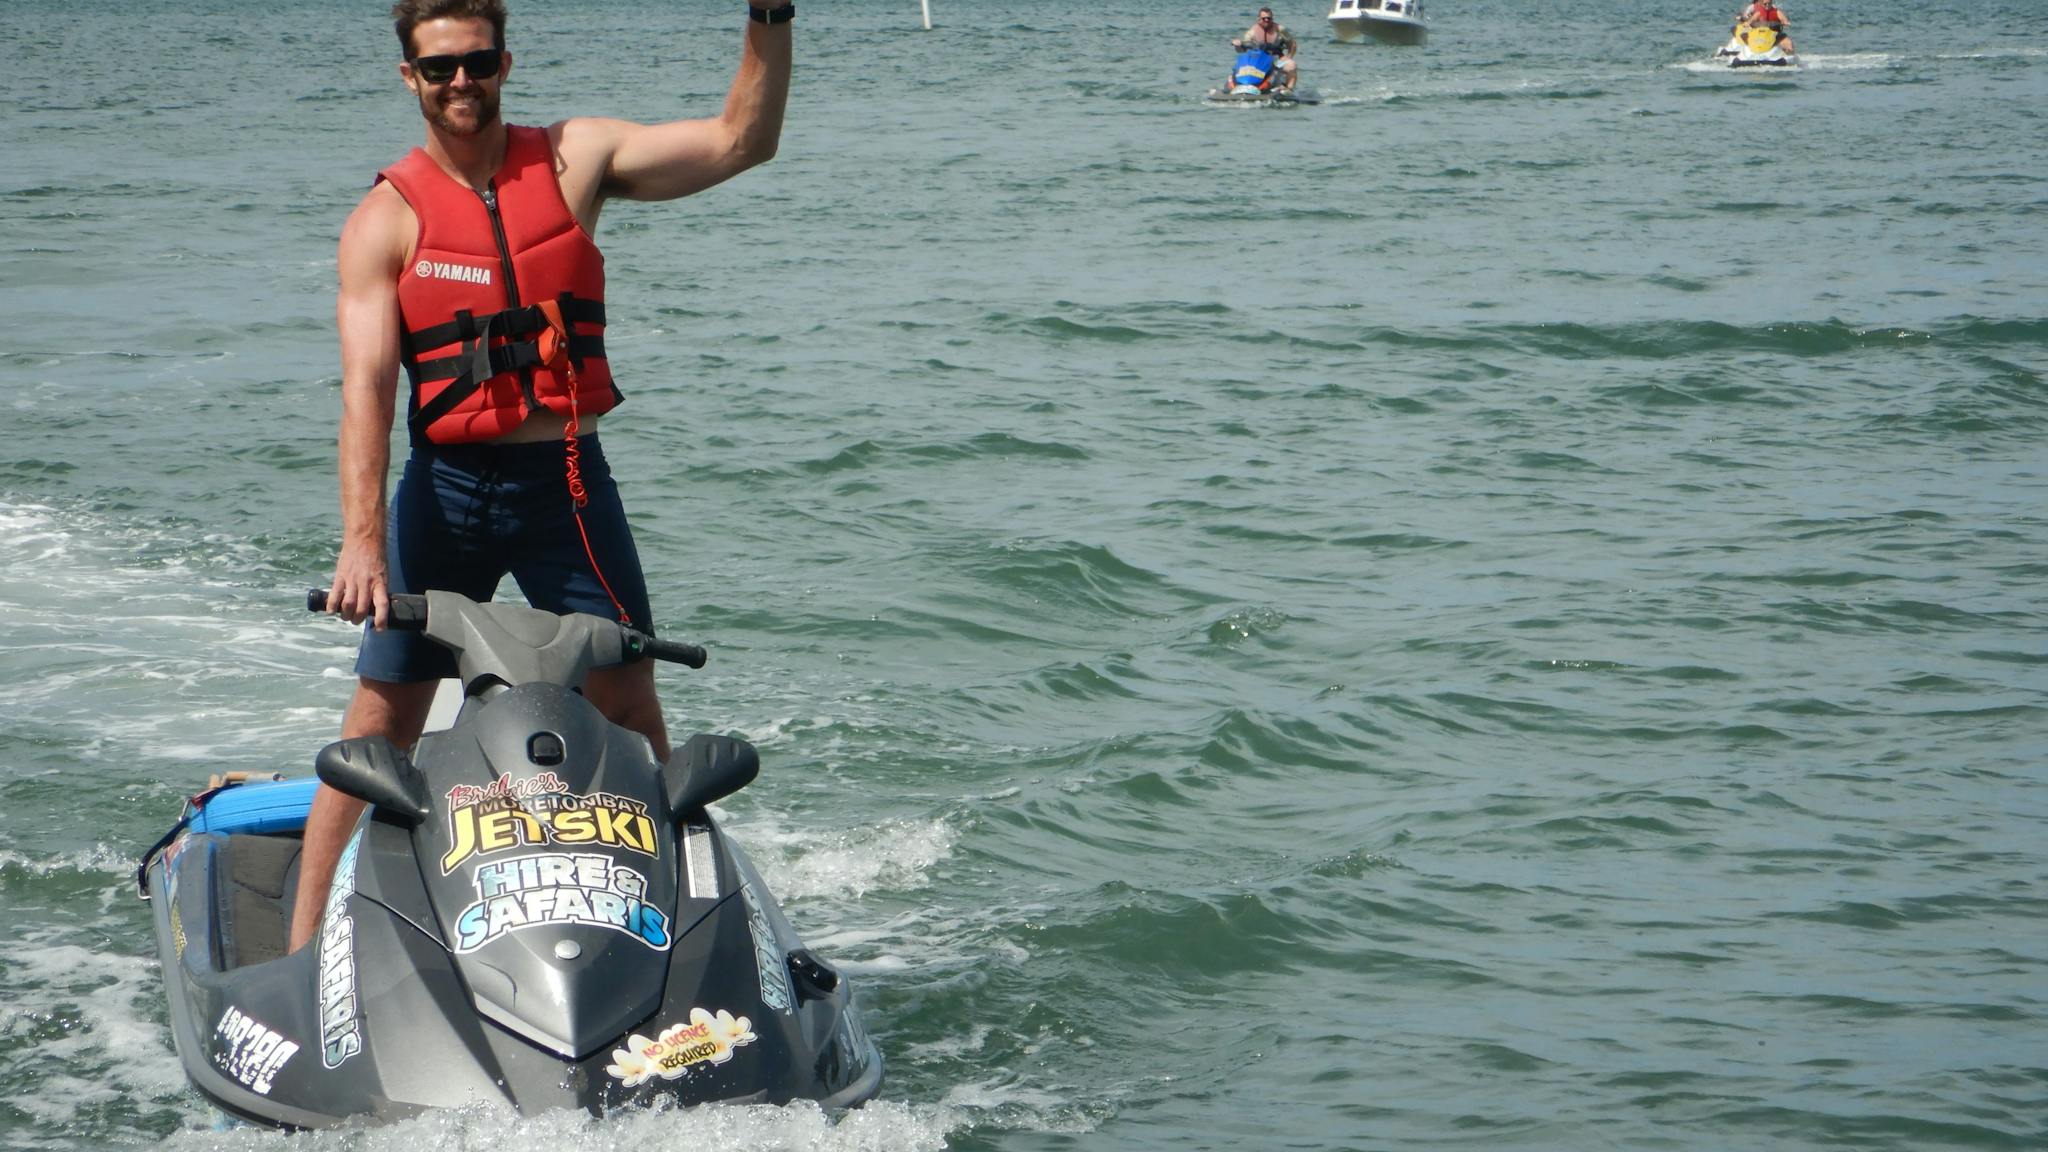 All guides are qualified marine instructors with years of experience